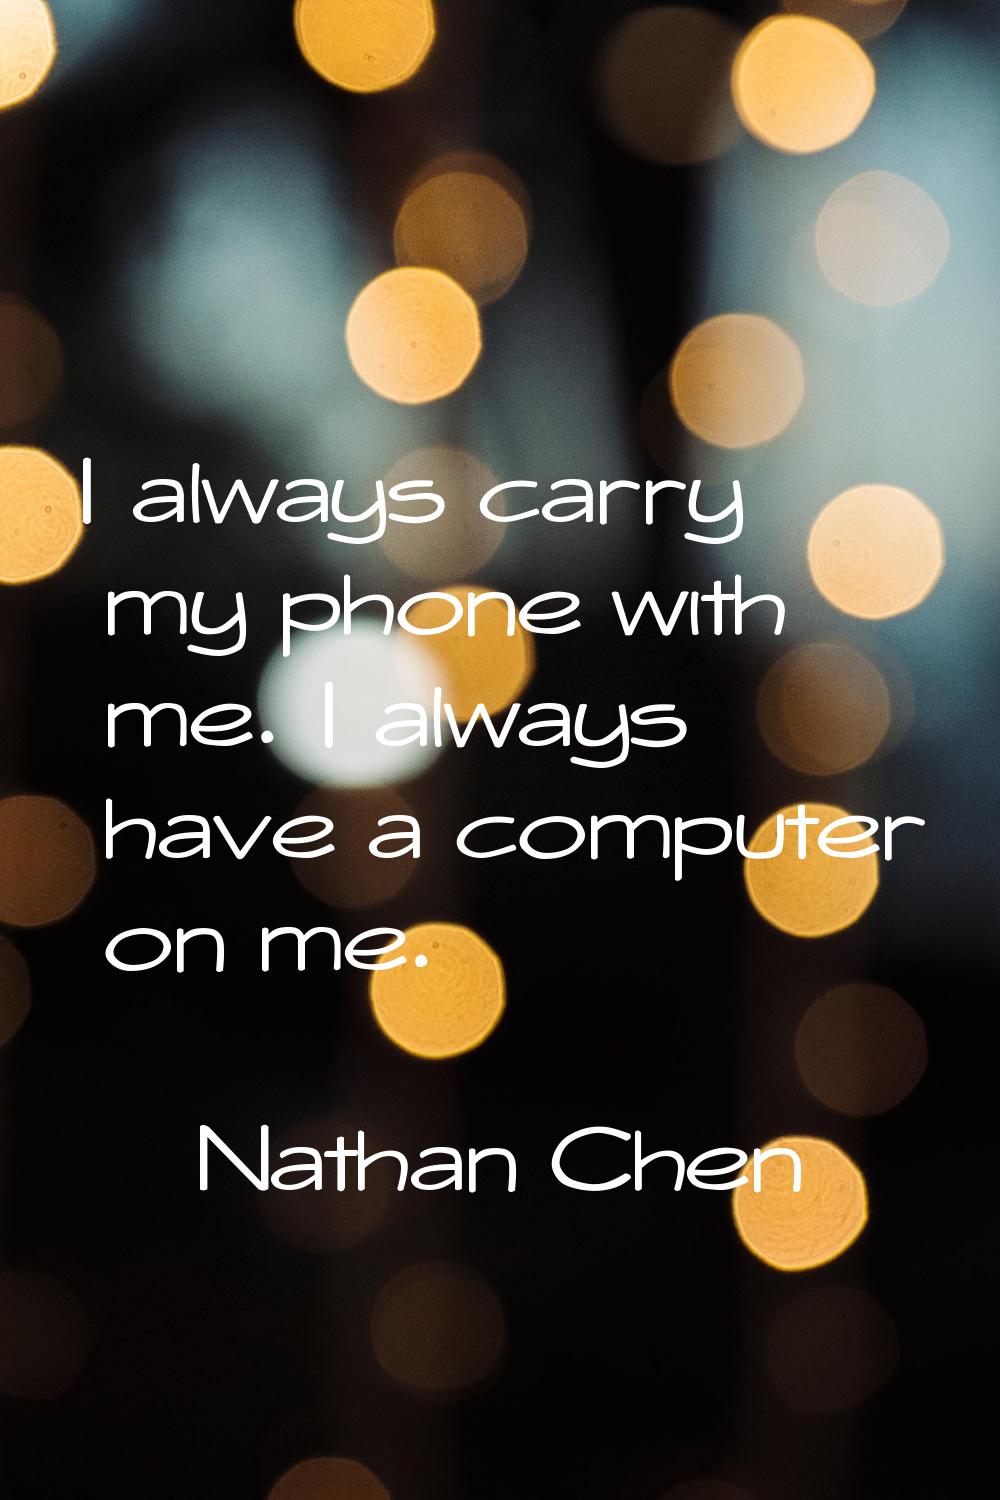 I always carry my phone with me. I always have a computer on me.